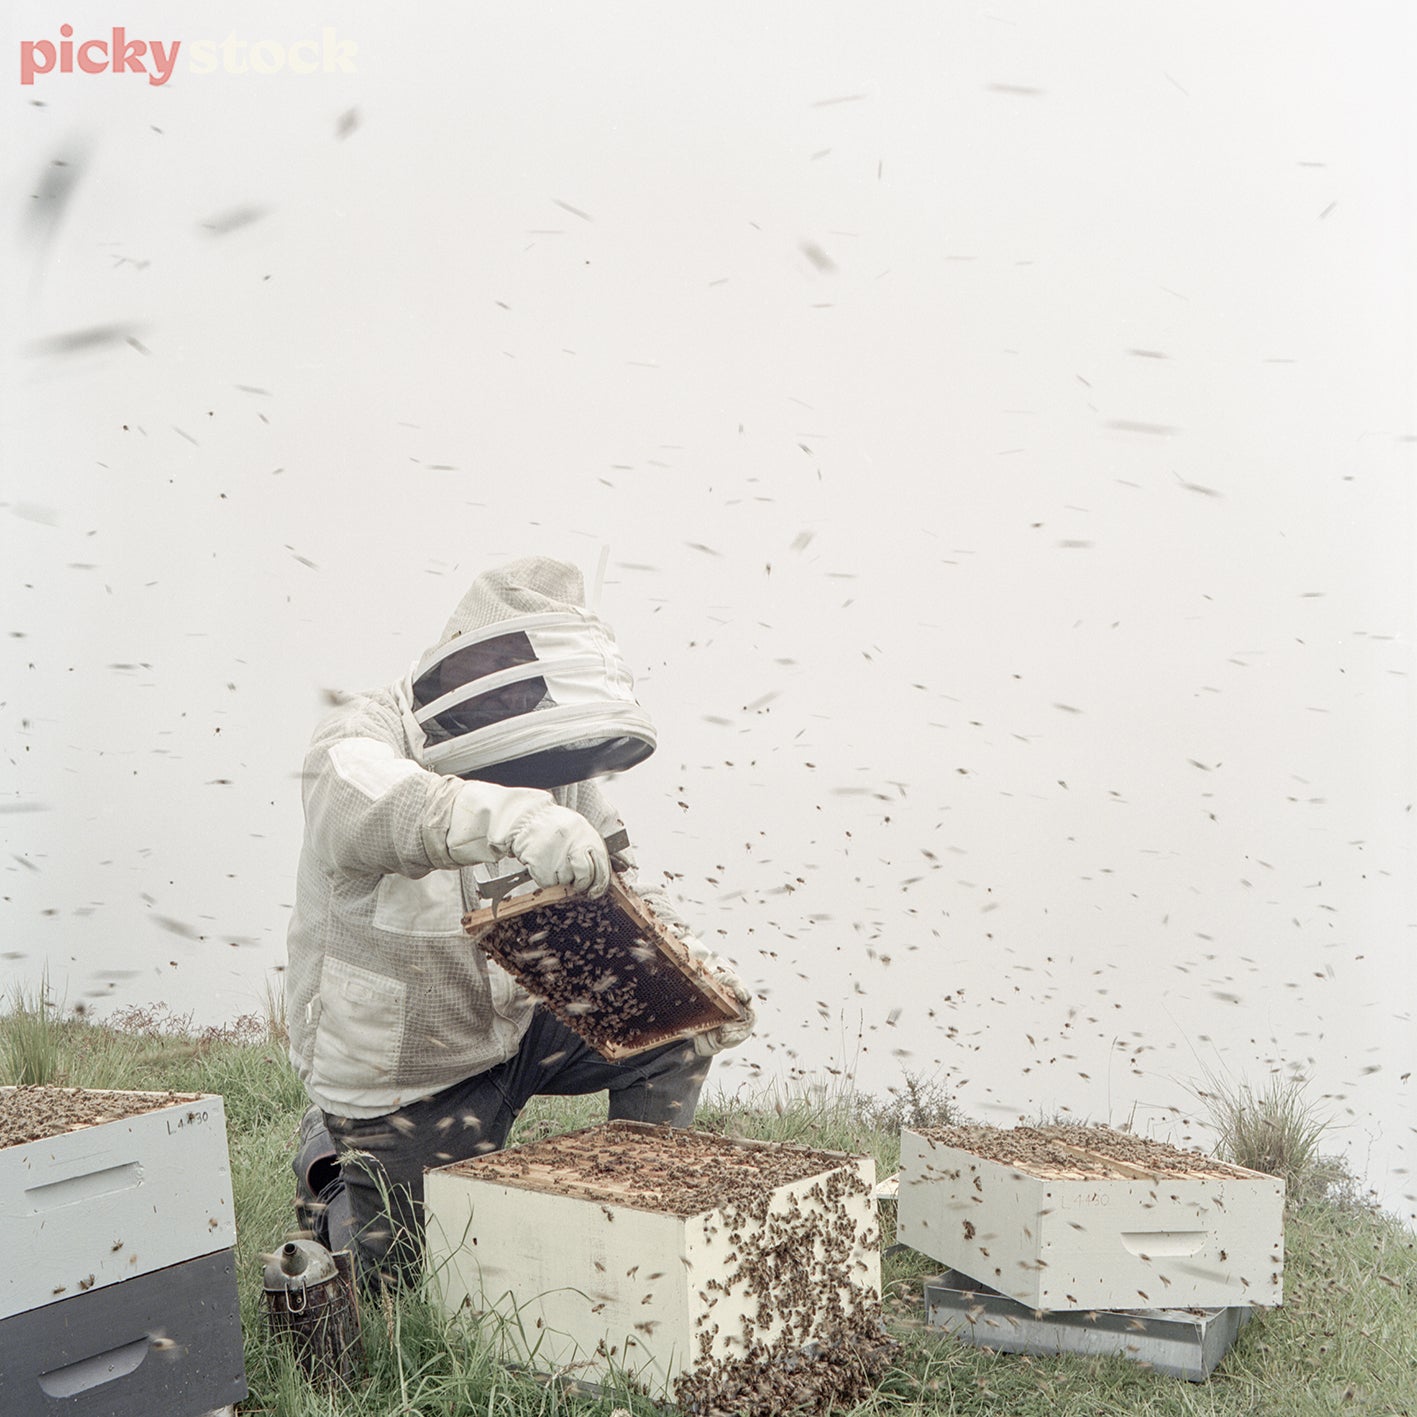 Beekeeper collecting honeycomb. Background is white with hundreds of bees circiling around the action. Beekeeper is in full protective gear around the hive. 